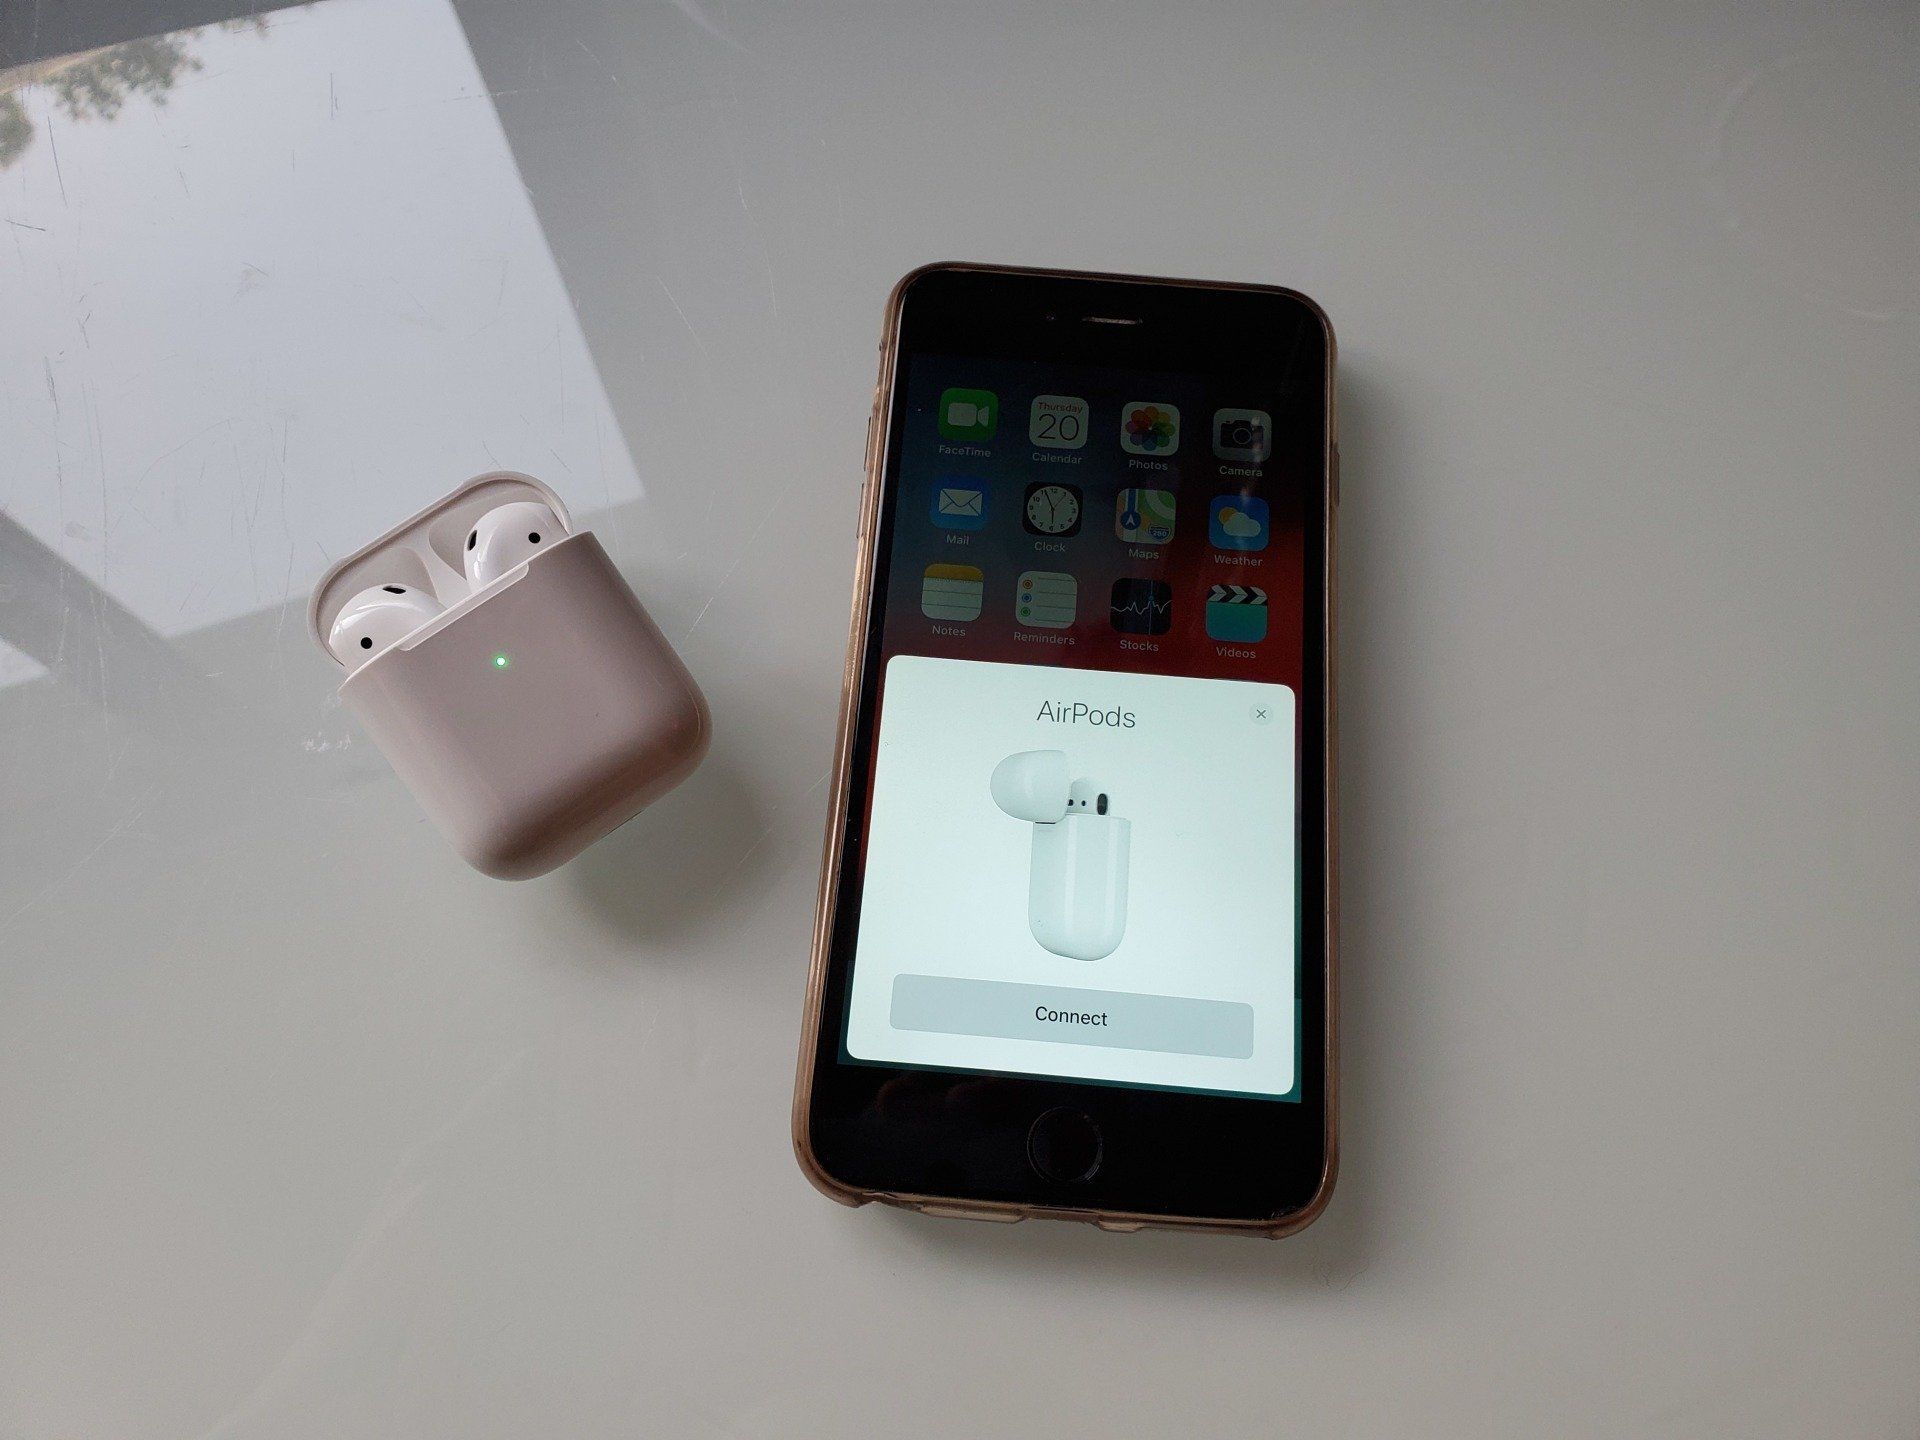 AirPods next to an iPhone, with the menu setup screen.